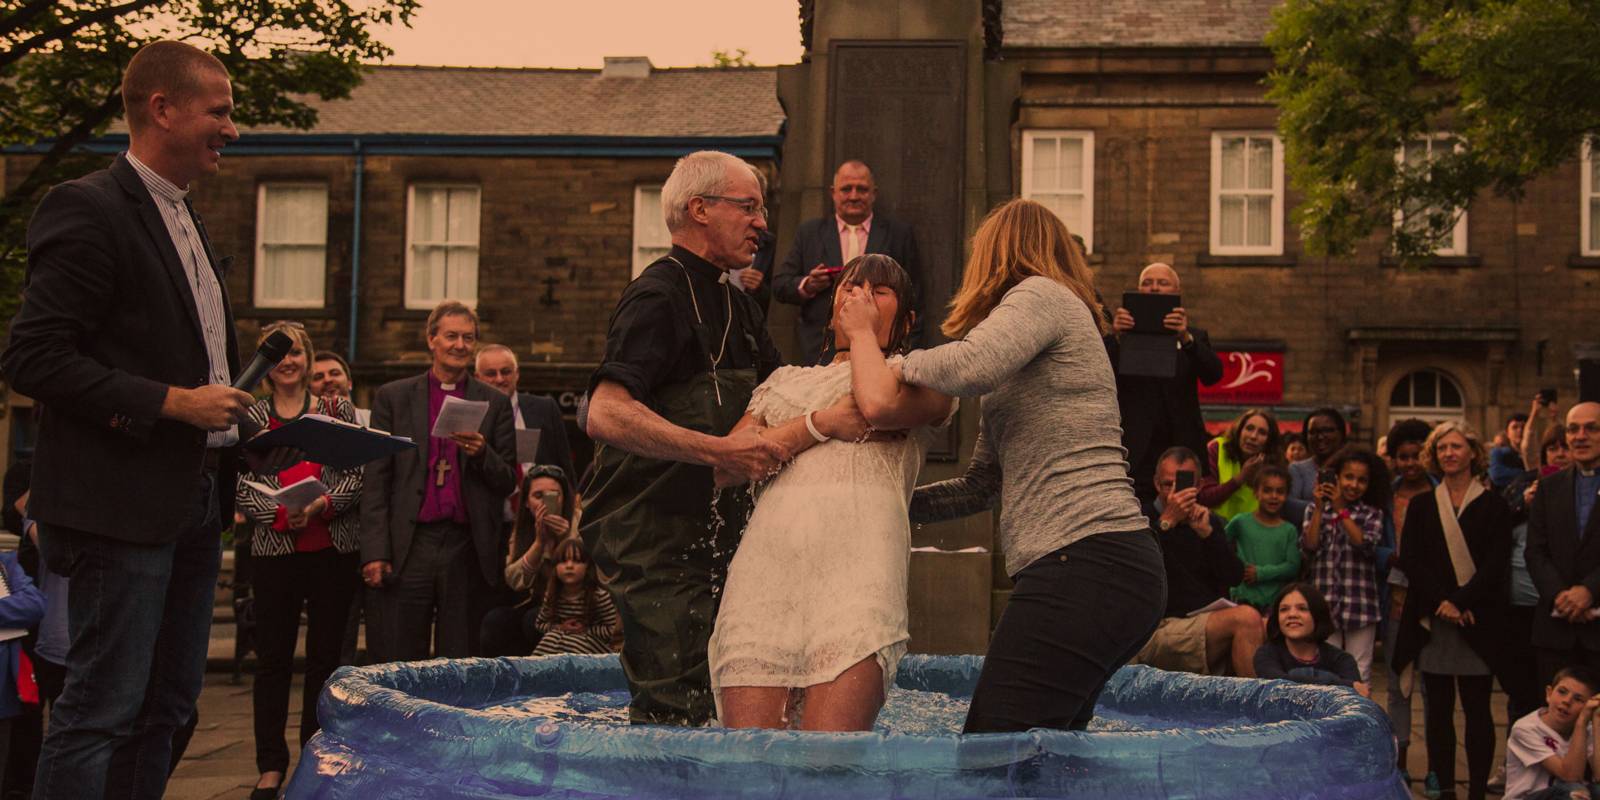 Adult baptism outside with Archbishop of Canterbury 